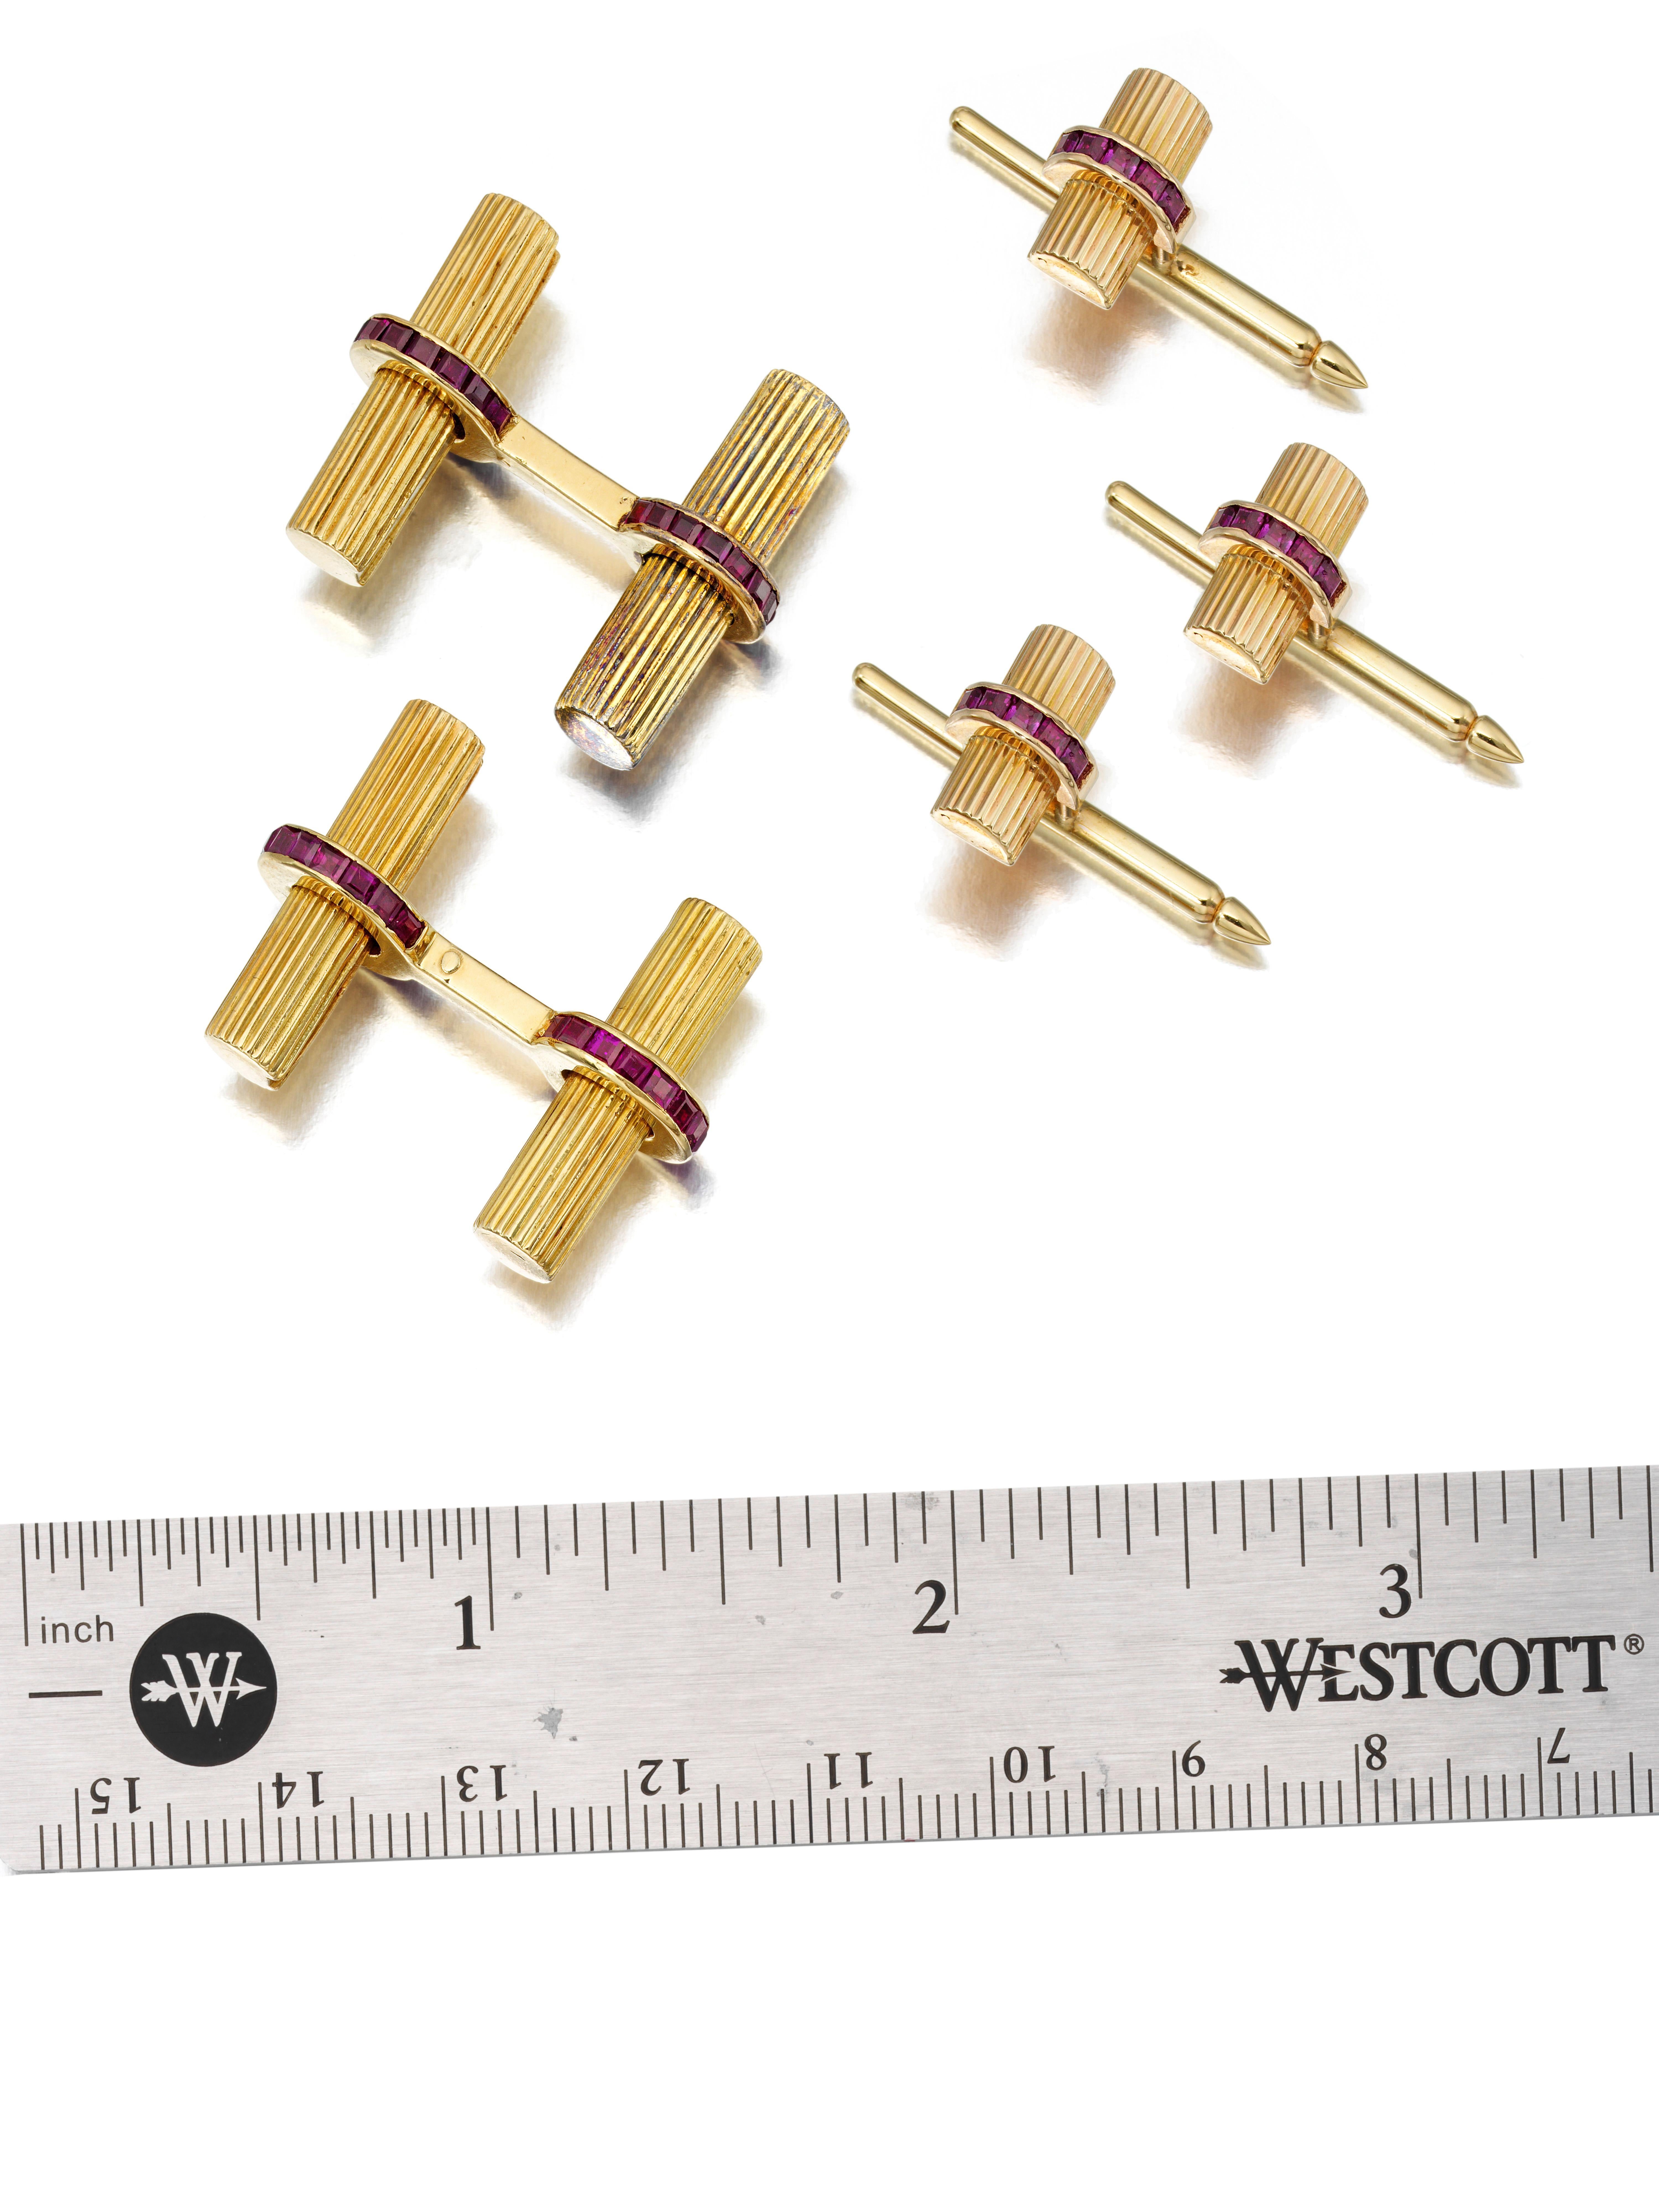 Tiffany & Co. 14K Gold and Ruby Dress-Set Cufflinks, Circa 1945 In Good Condition For Sale In Perry, FL